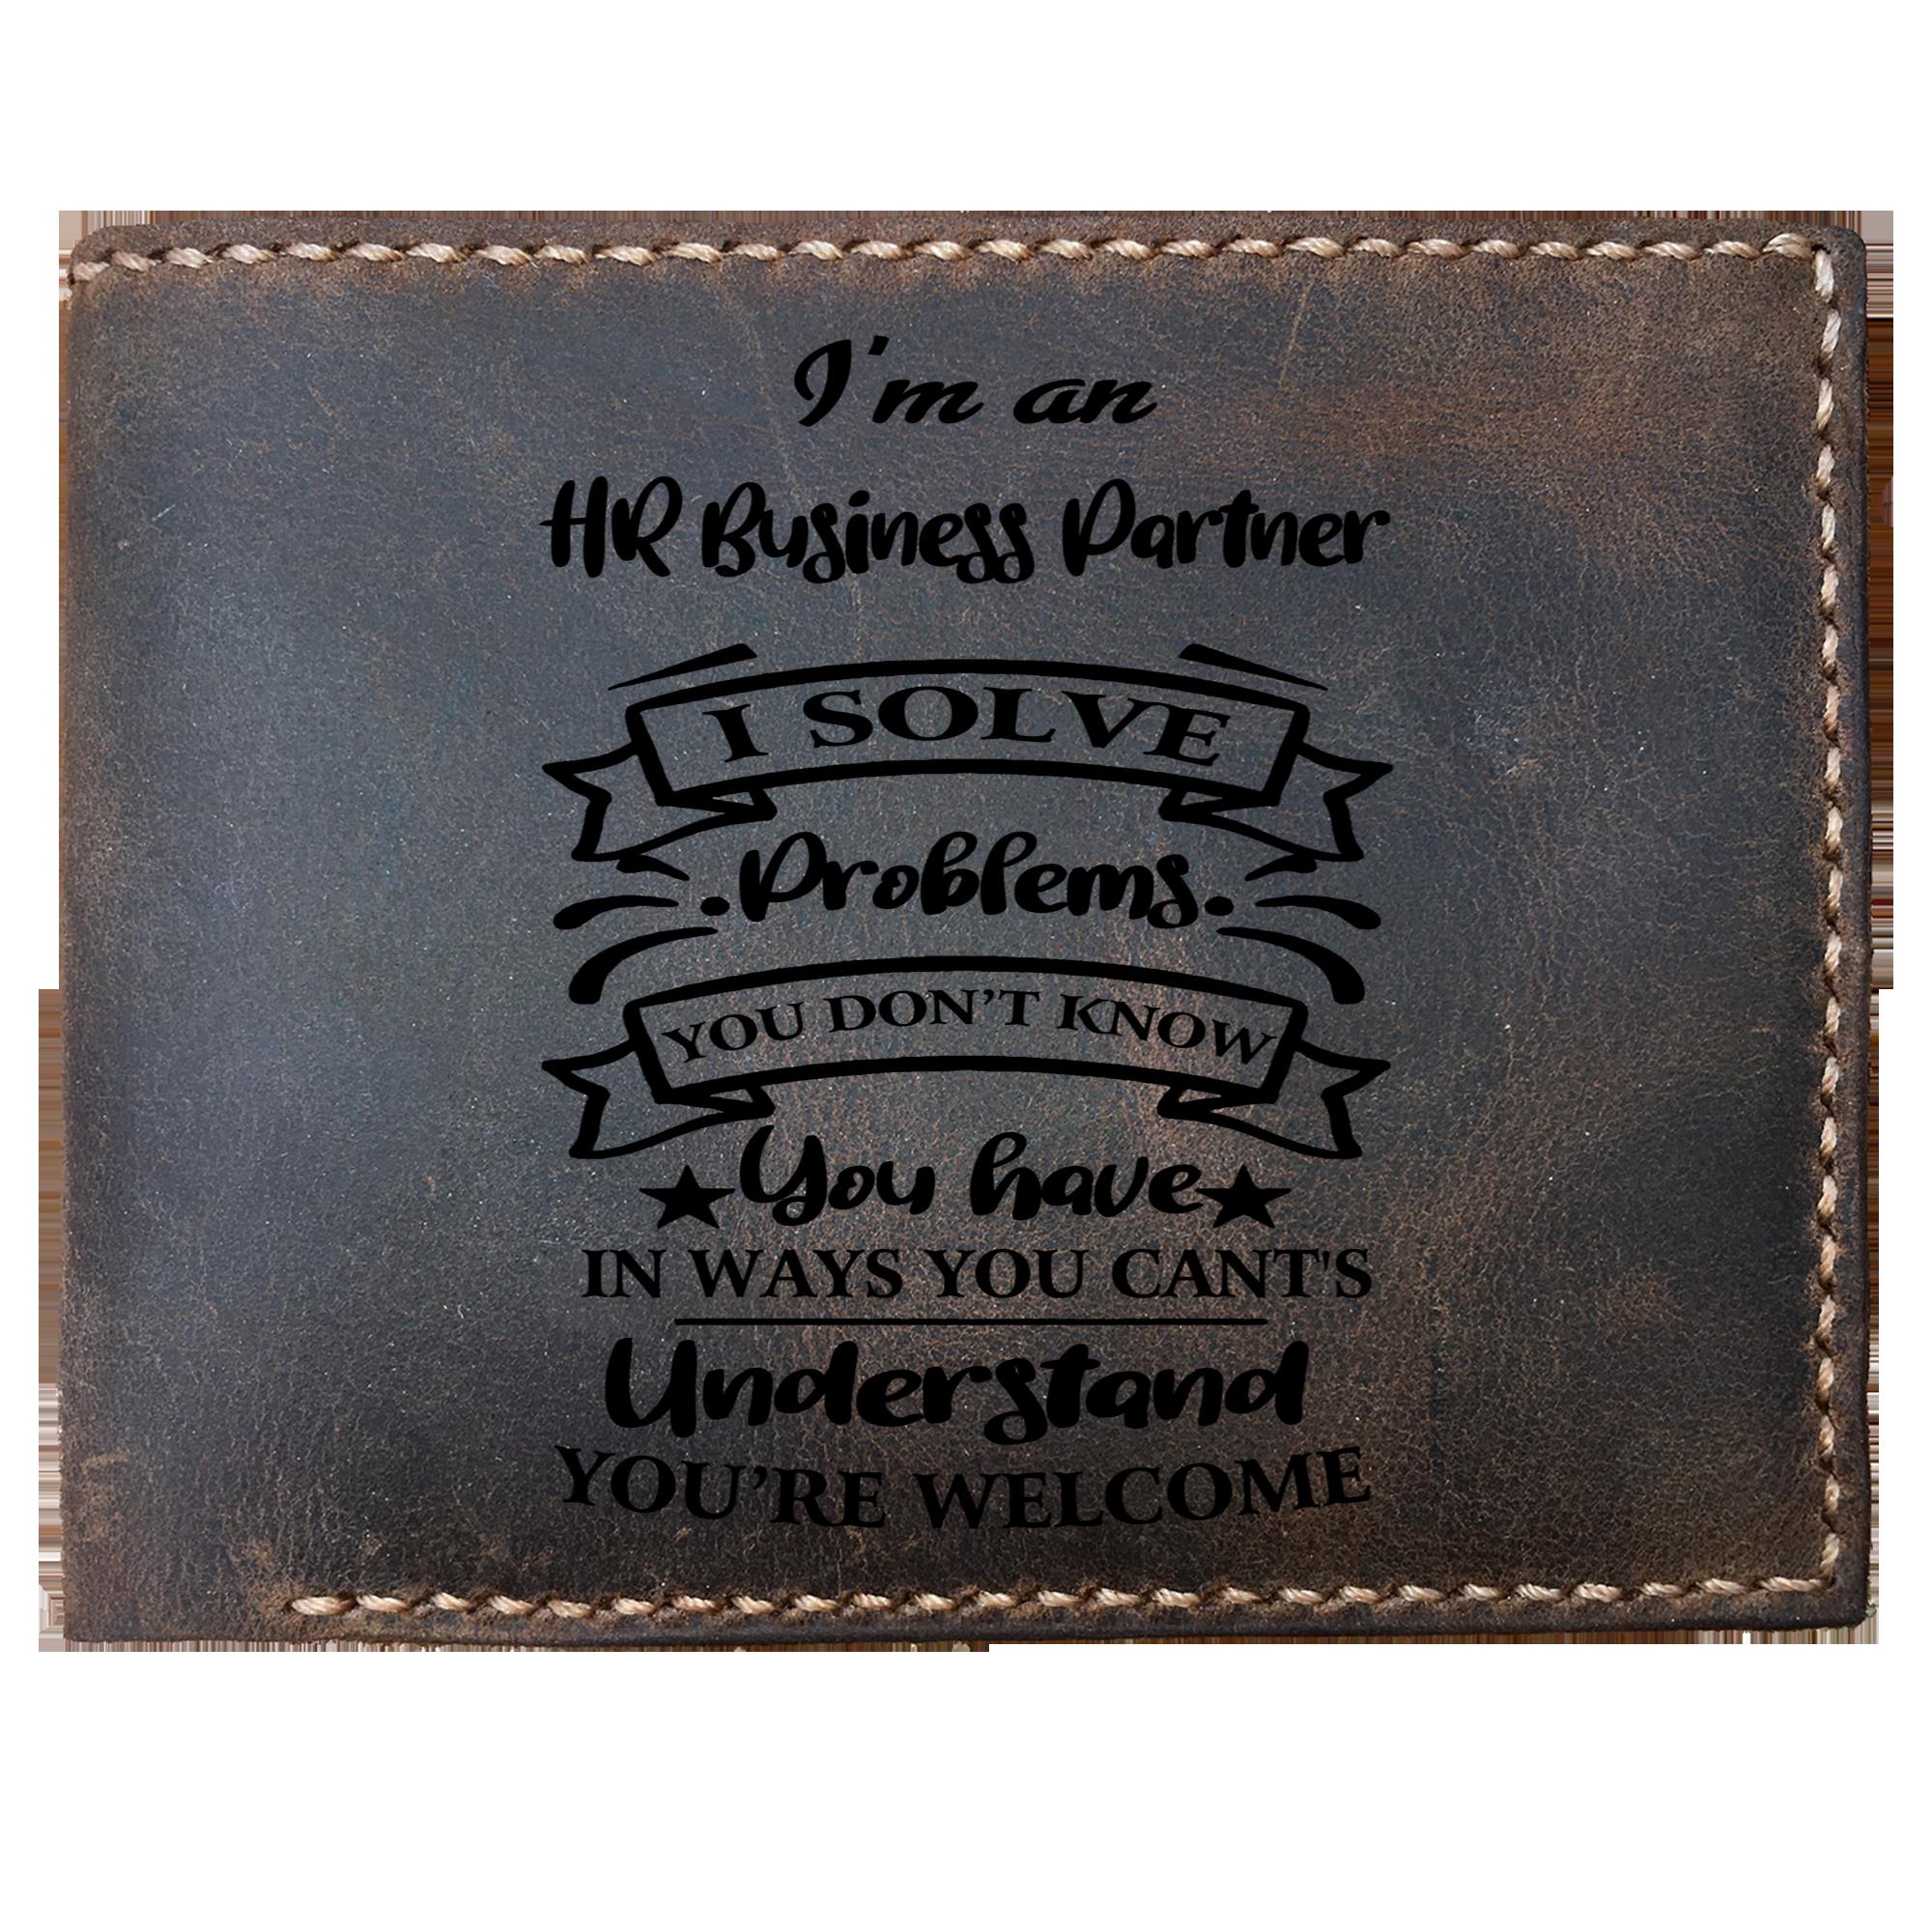 Skitongifts Funny Custom Laser Engraved Bifold Leather Wallet For Men, I'm an HR Business Partner Solve Problems, Father's Day Gifts